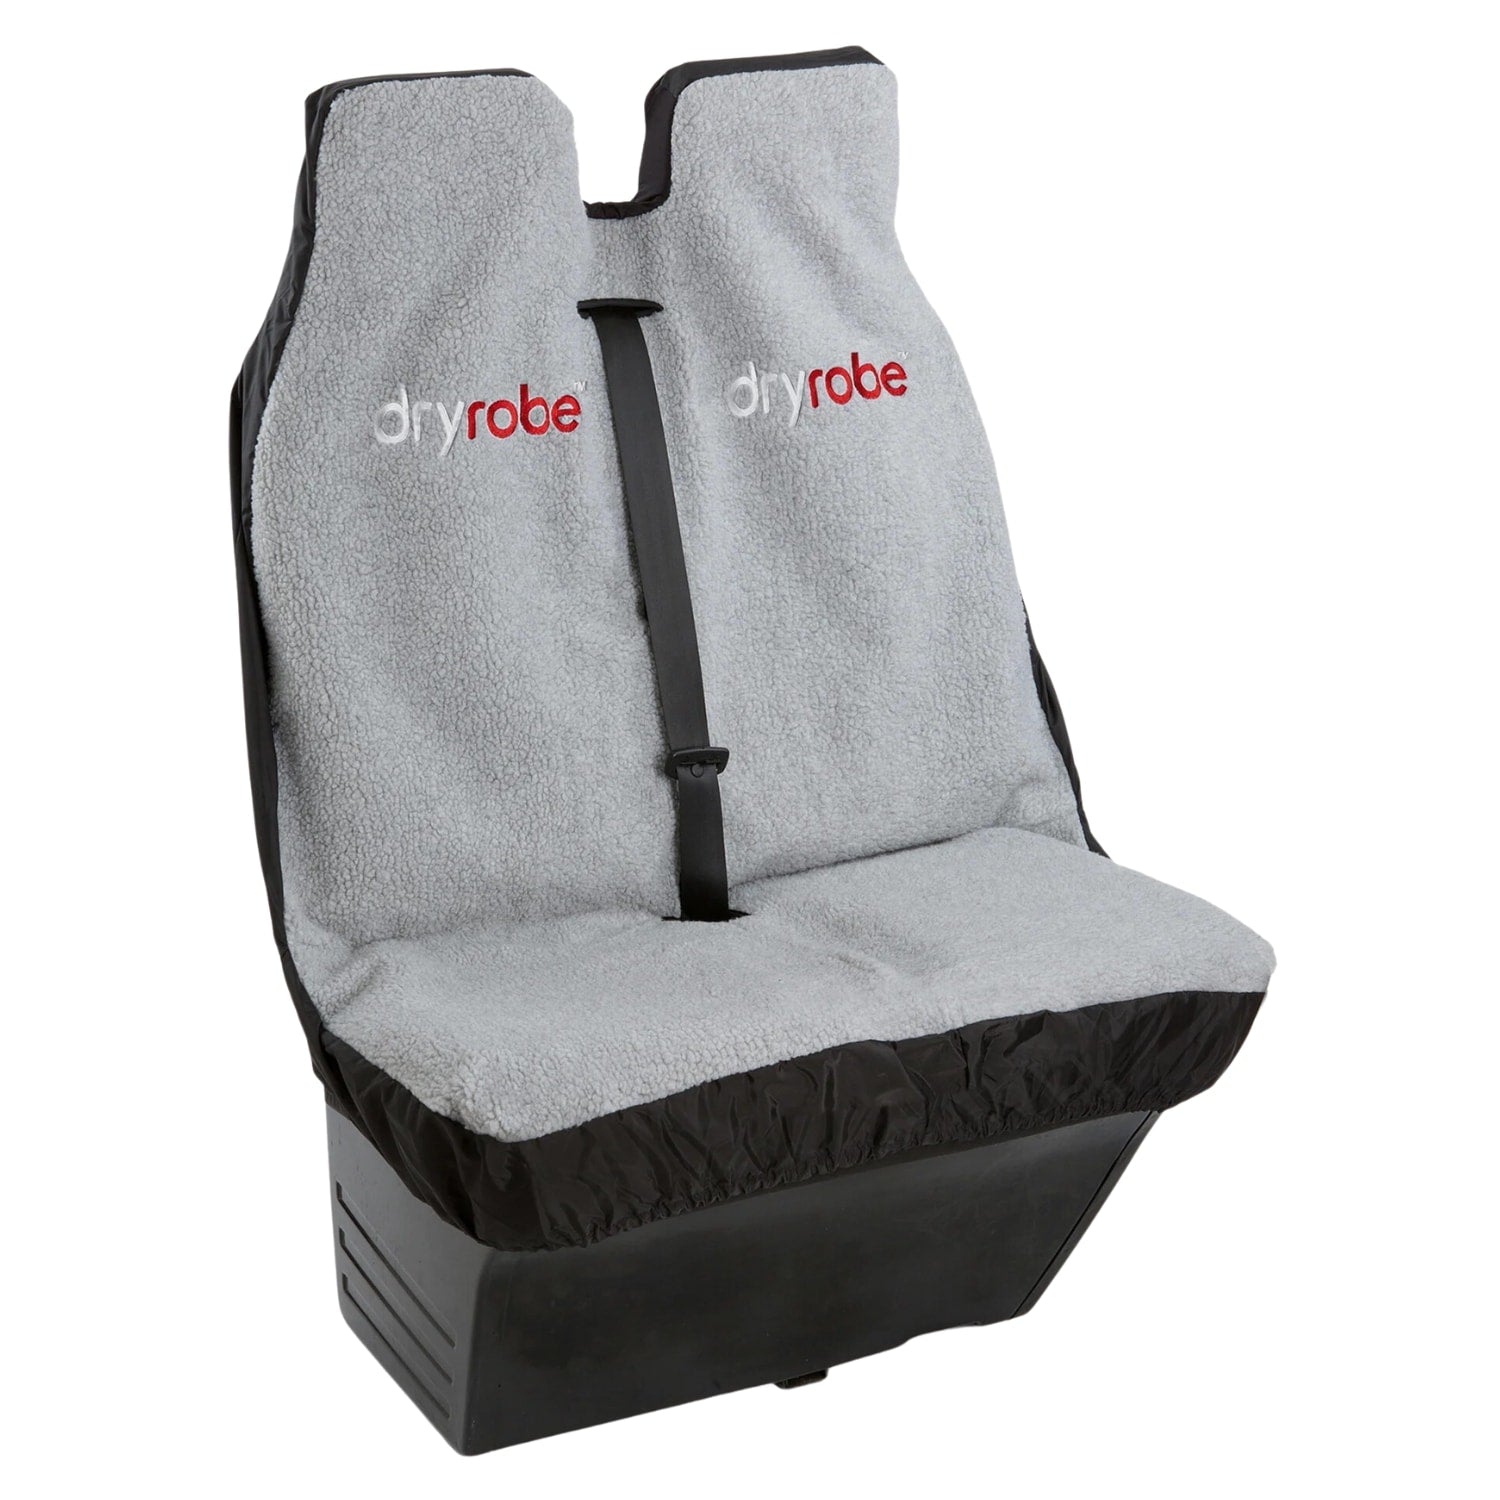 Dryrobe Double Car Seat Cover - Black Grey - Gifts for Surfers by Dryrobe